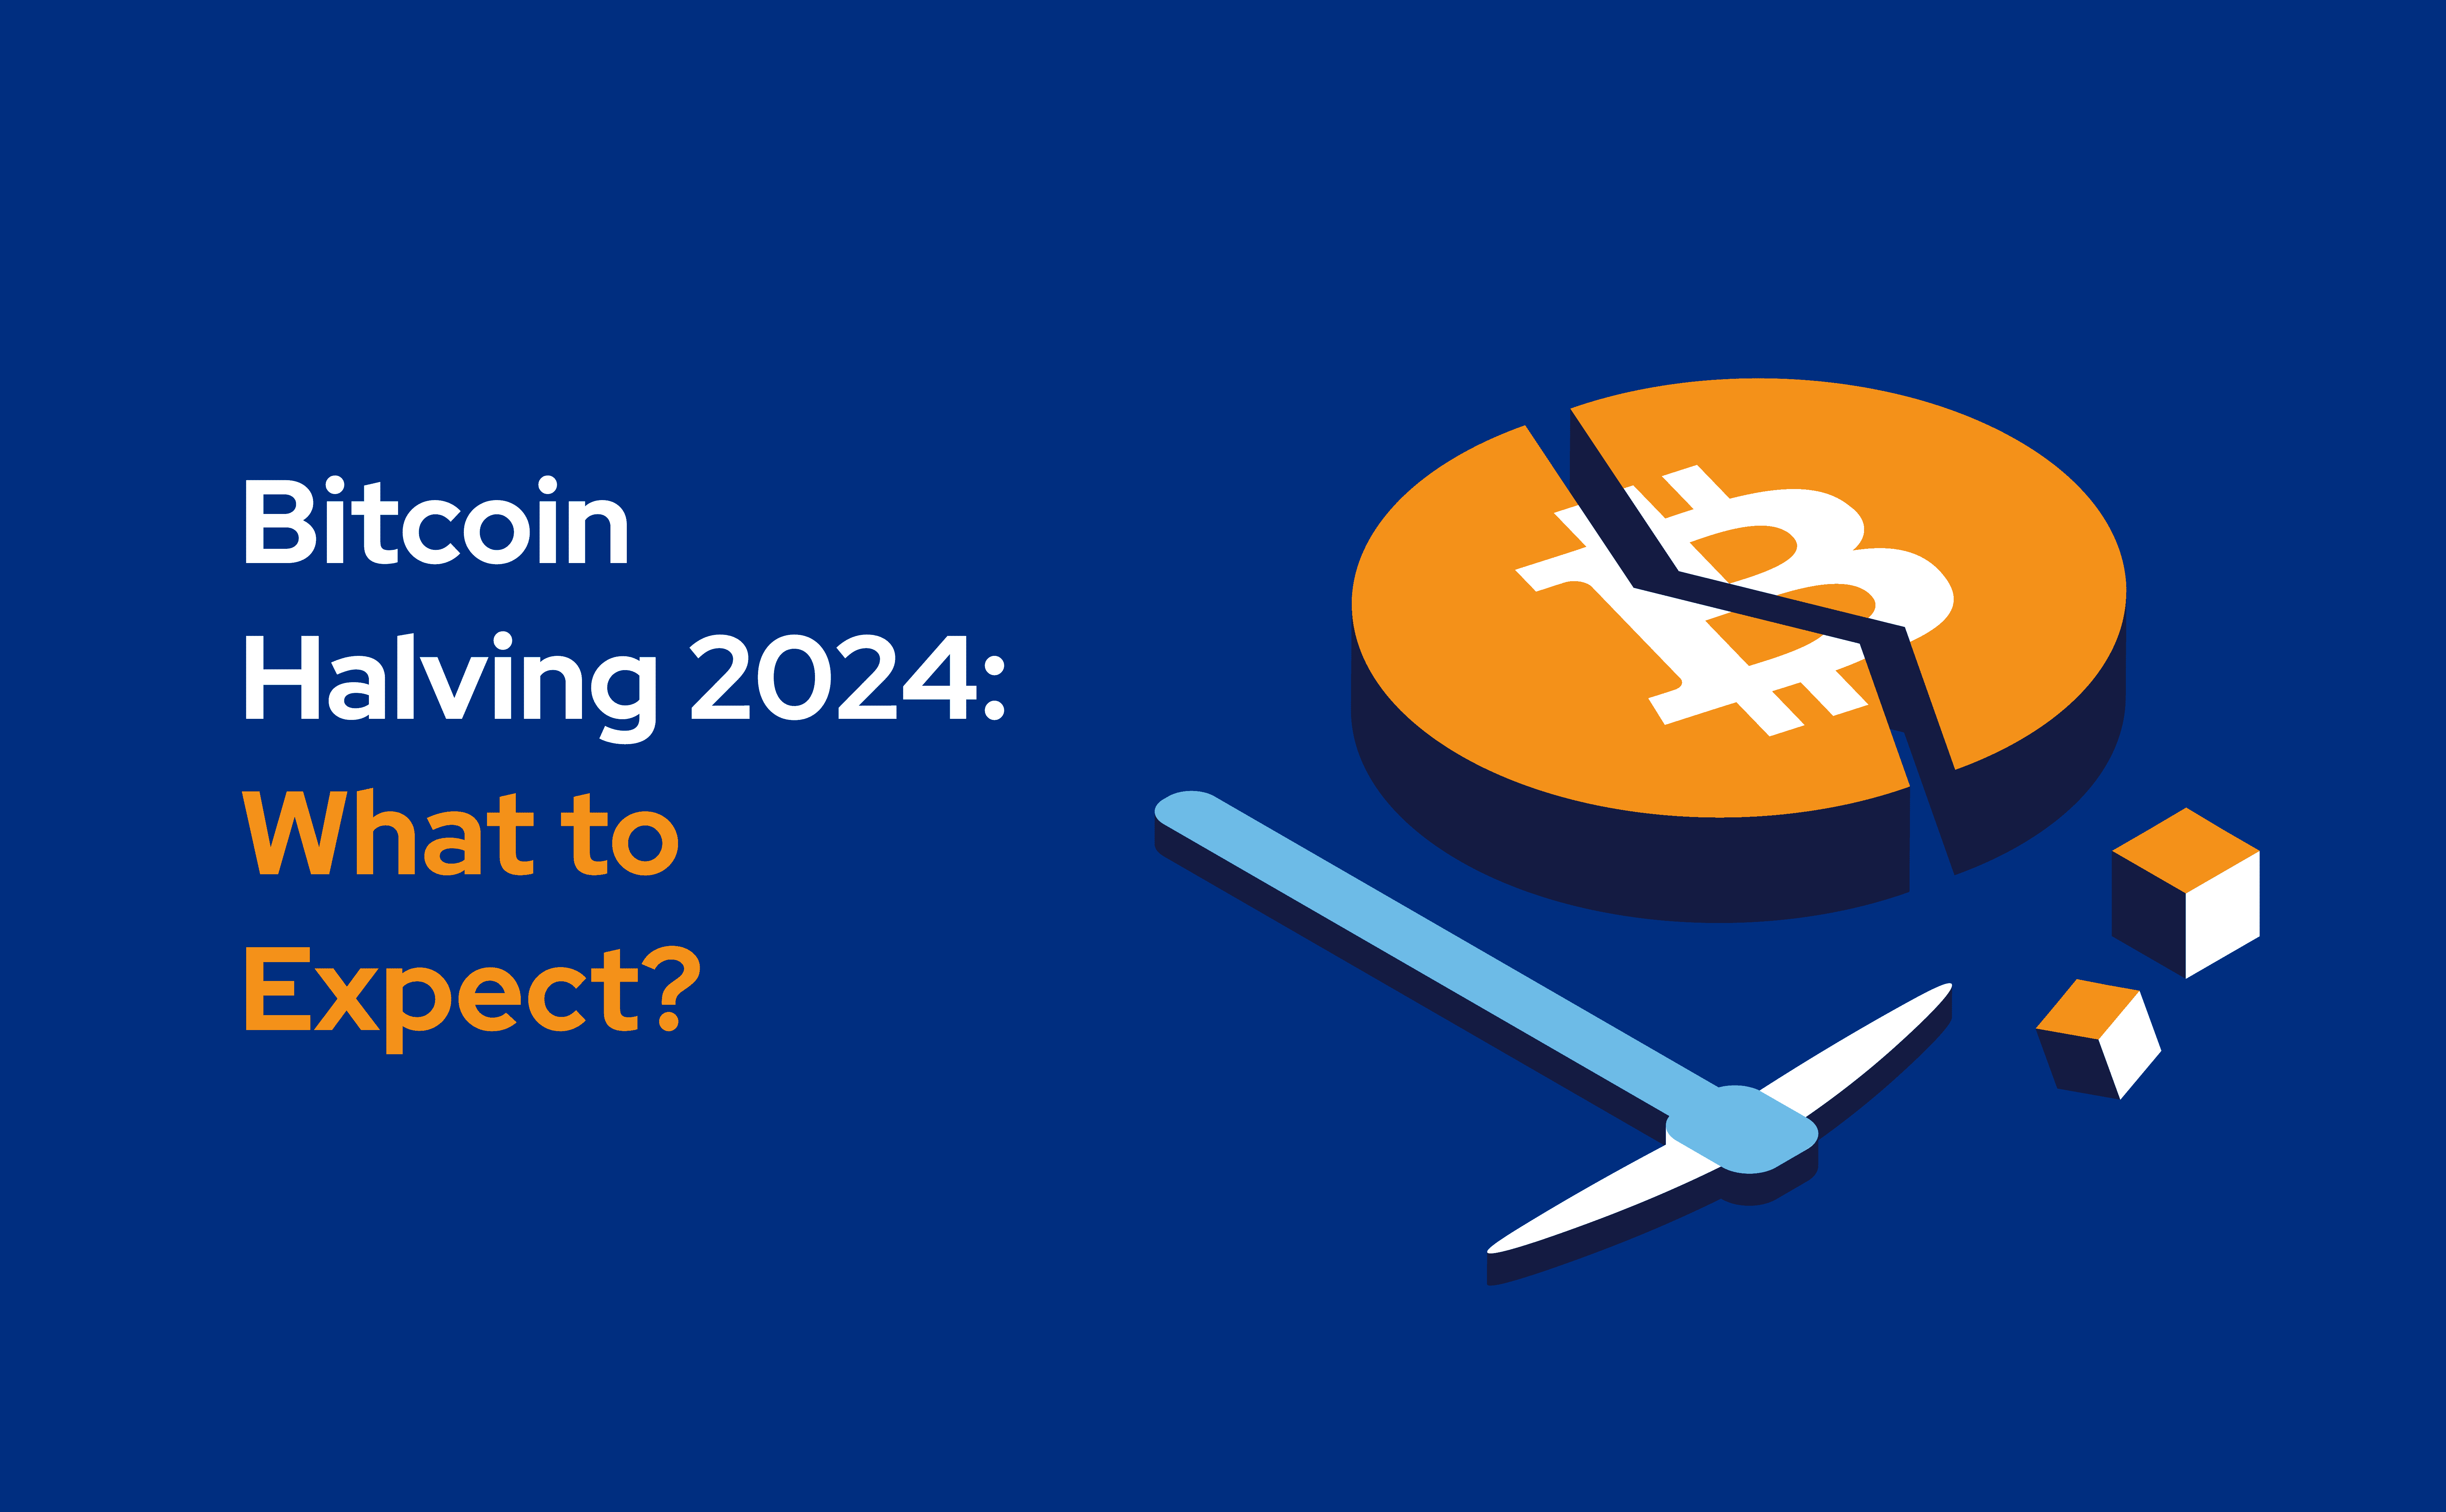 Bitcoin Halving 2024: What to Expect